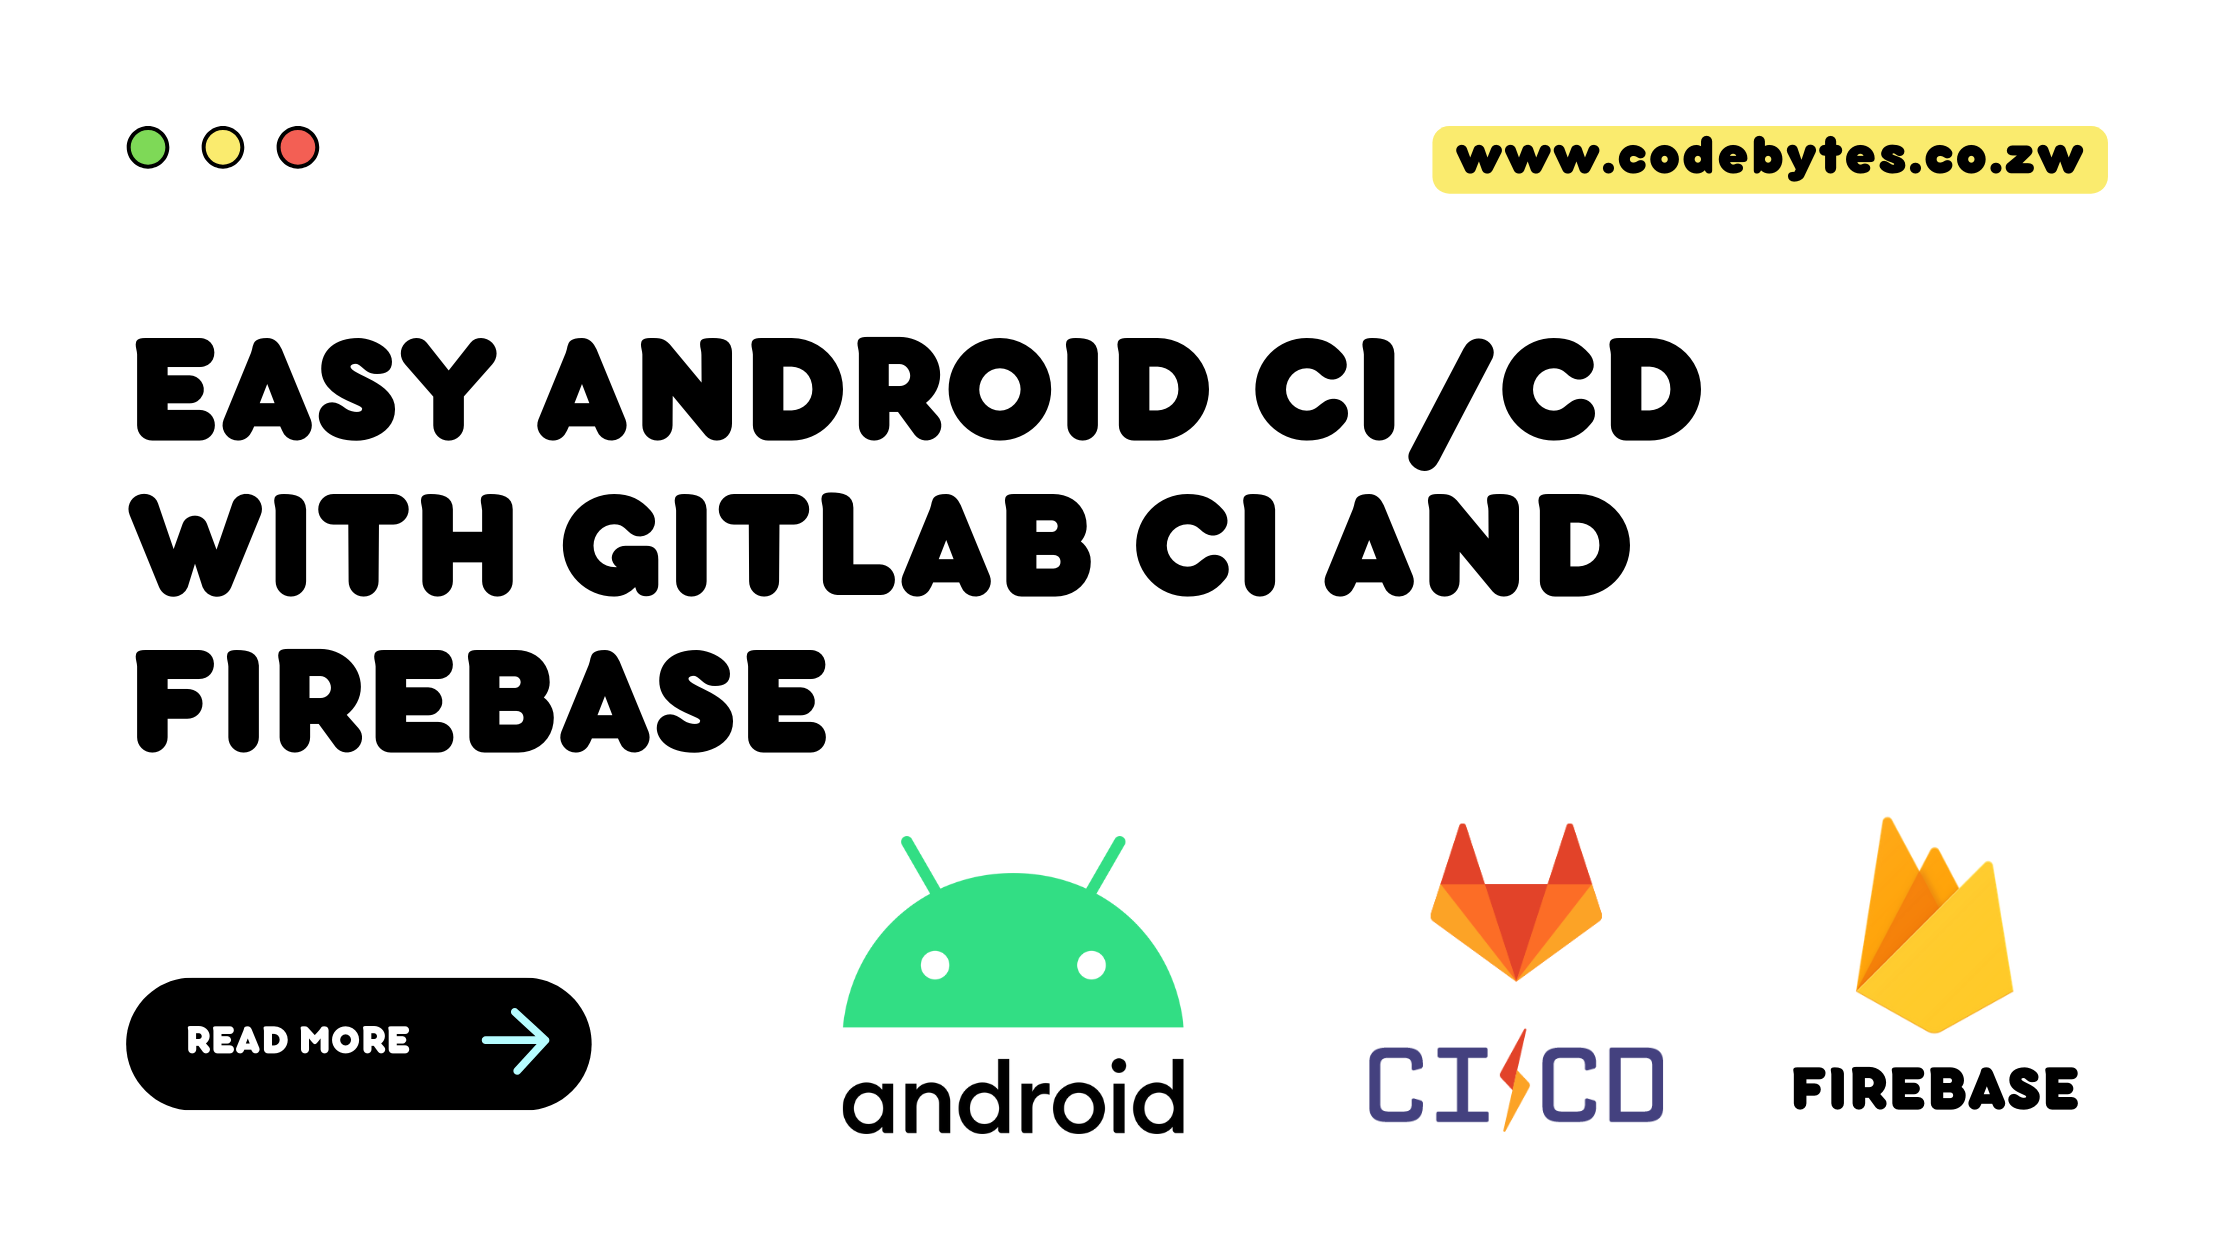 Easy Android CI/CD with Gitlab CI and Firebase